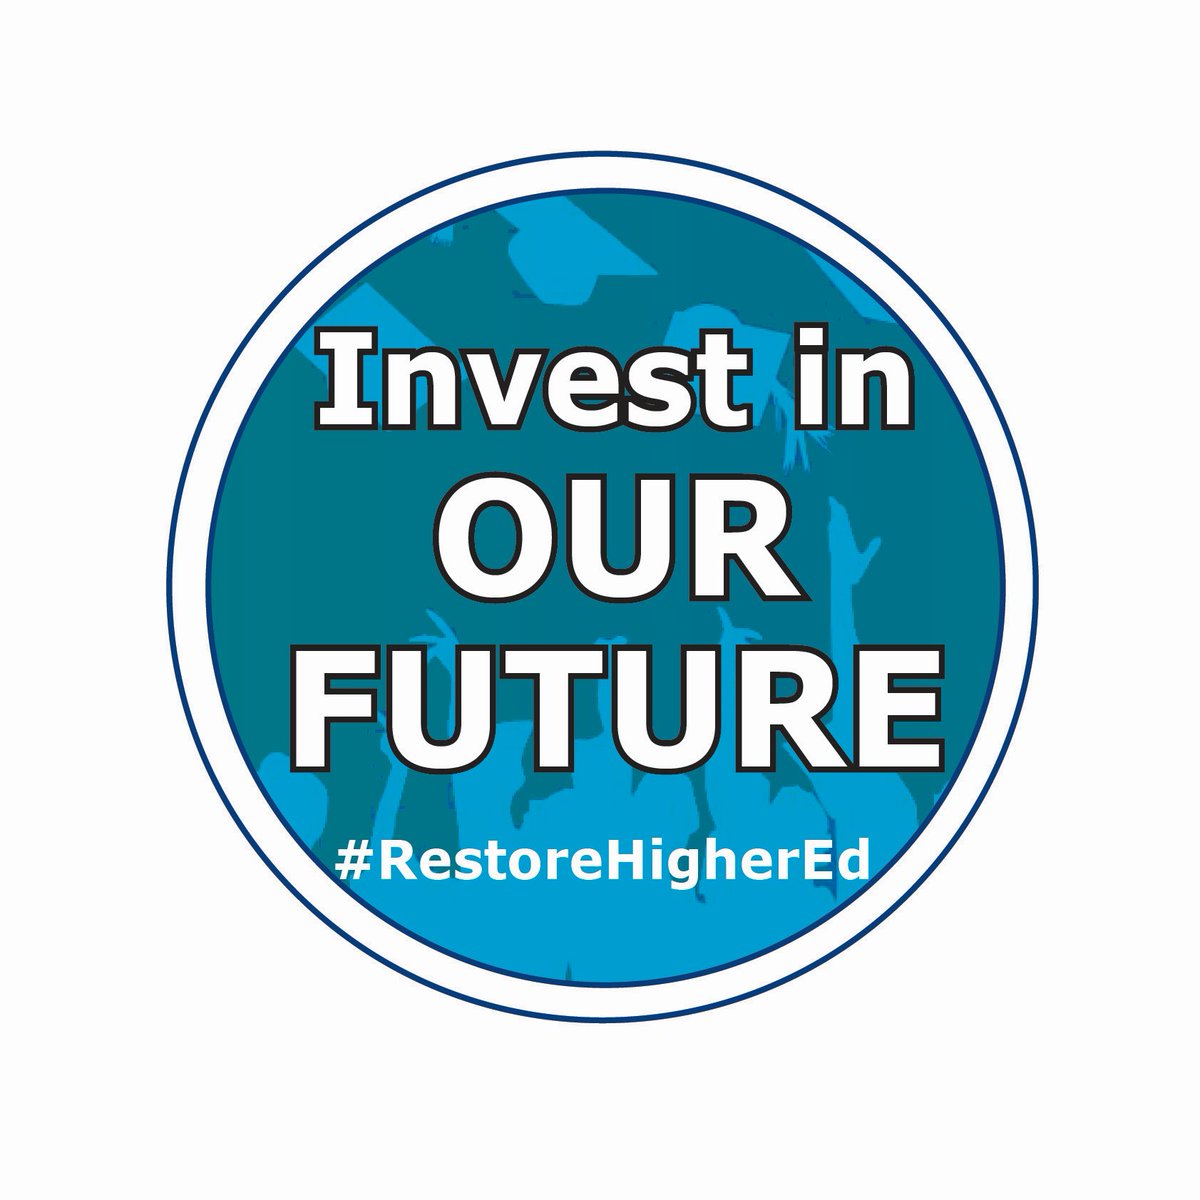 It’s Higher Ed Day at the Capitol – let’s recognize the value of investing in public colleges and universities. More degrees mean a stronger workforce, stronger economy. #RestoreHigherEd